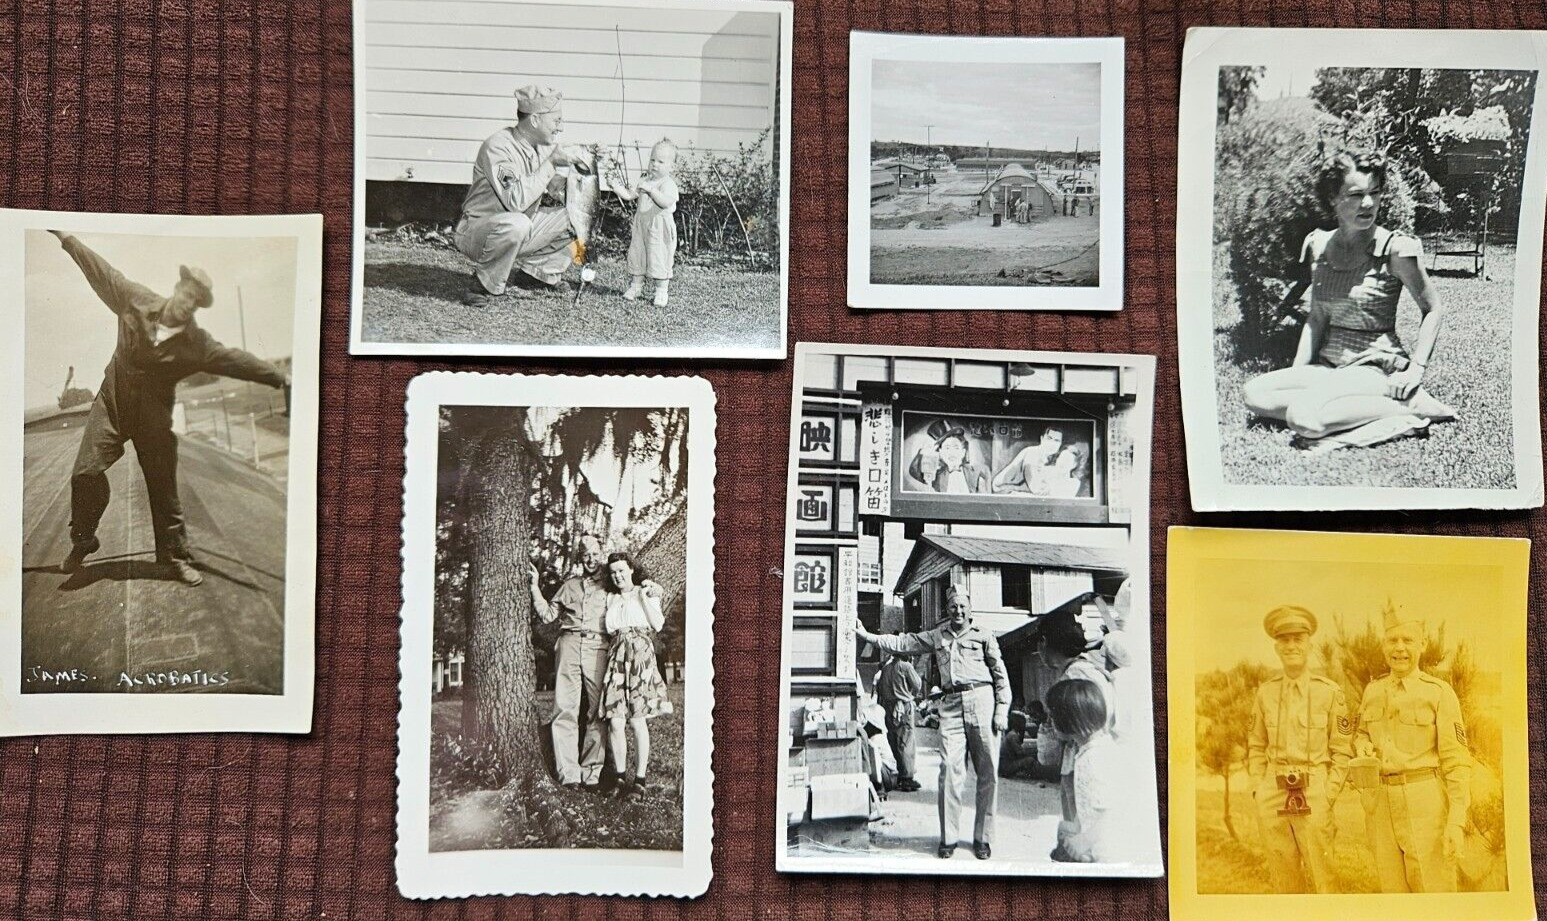 Lot of 300+ Vintage B&W Photos 1920's-1970's. Military, Travel, People, Cars.